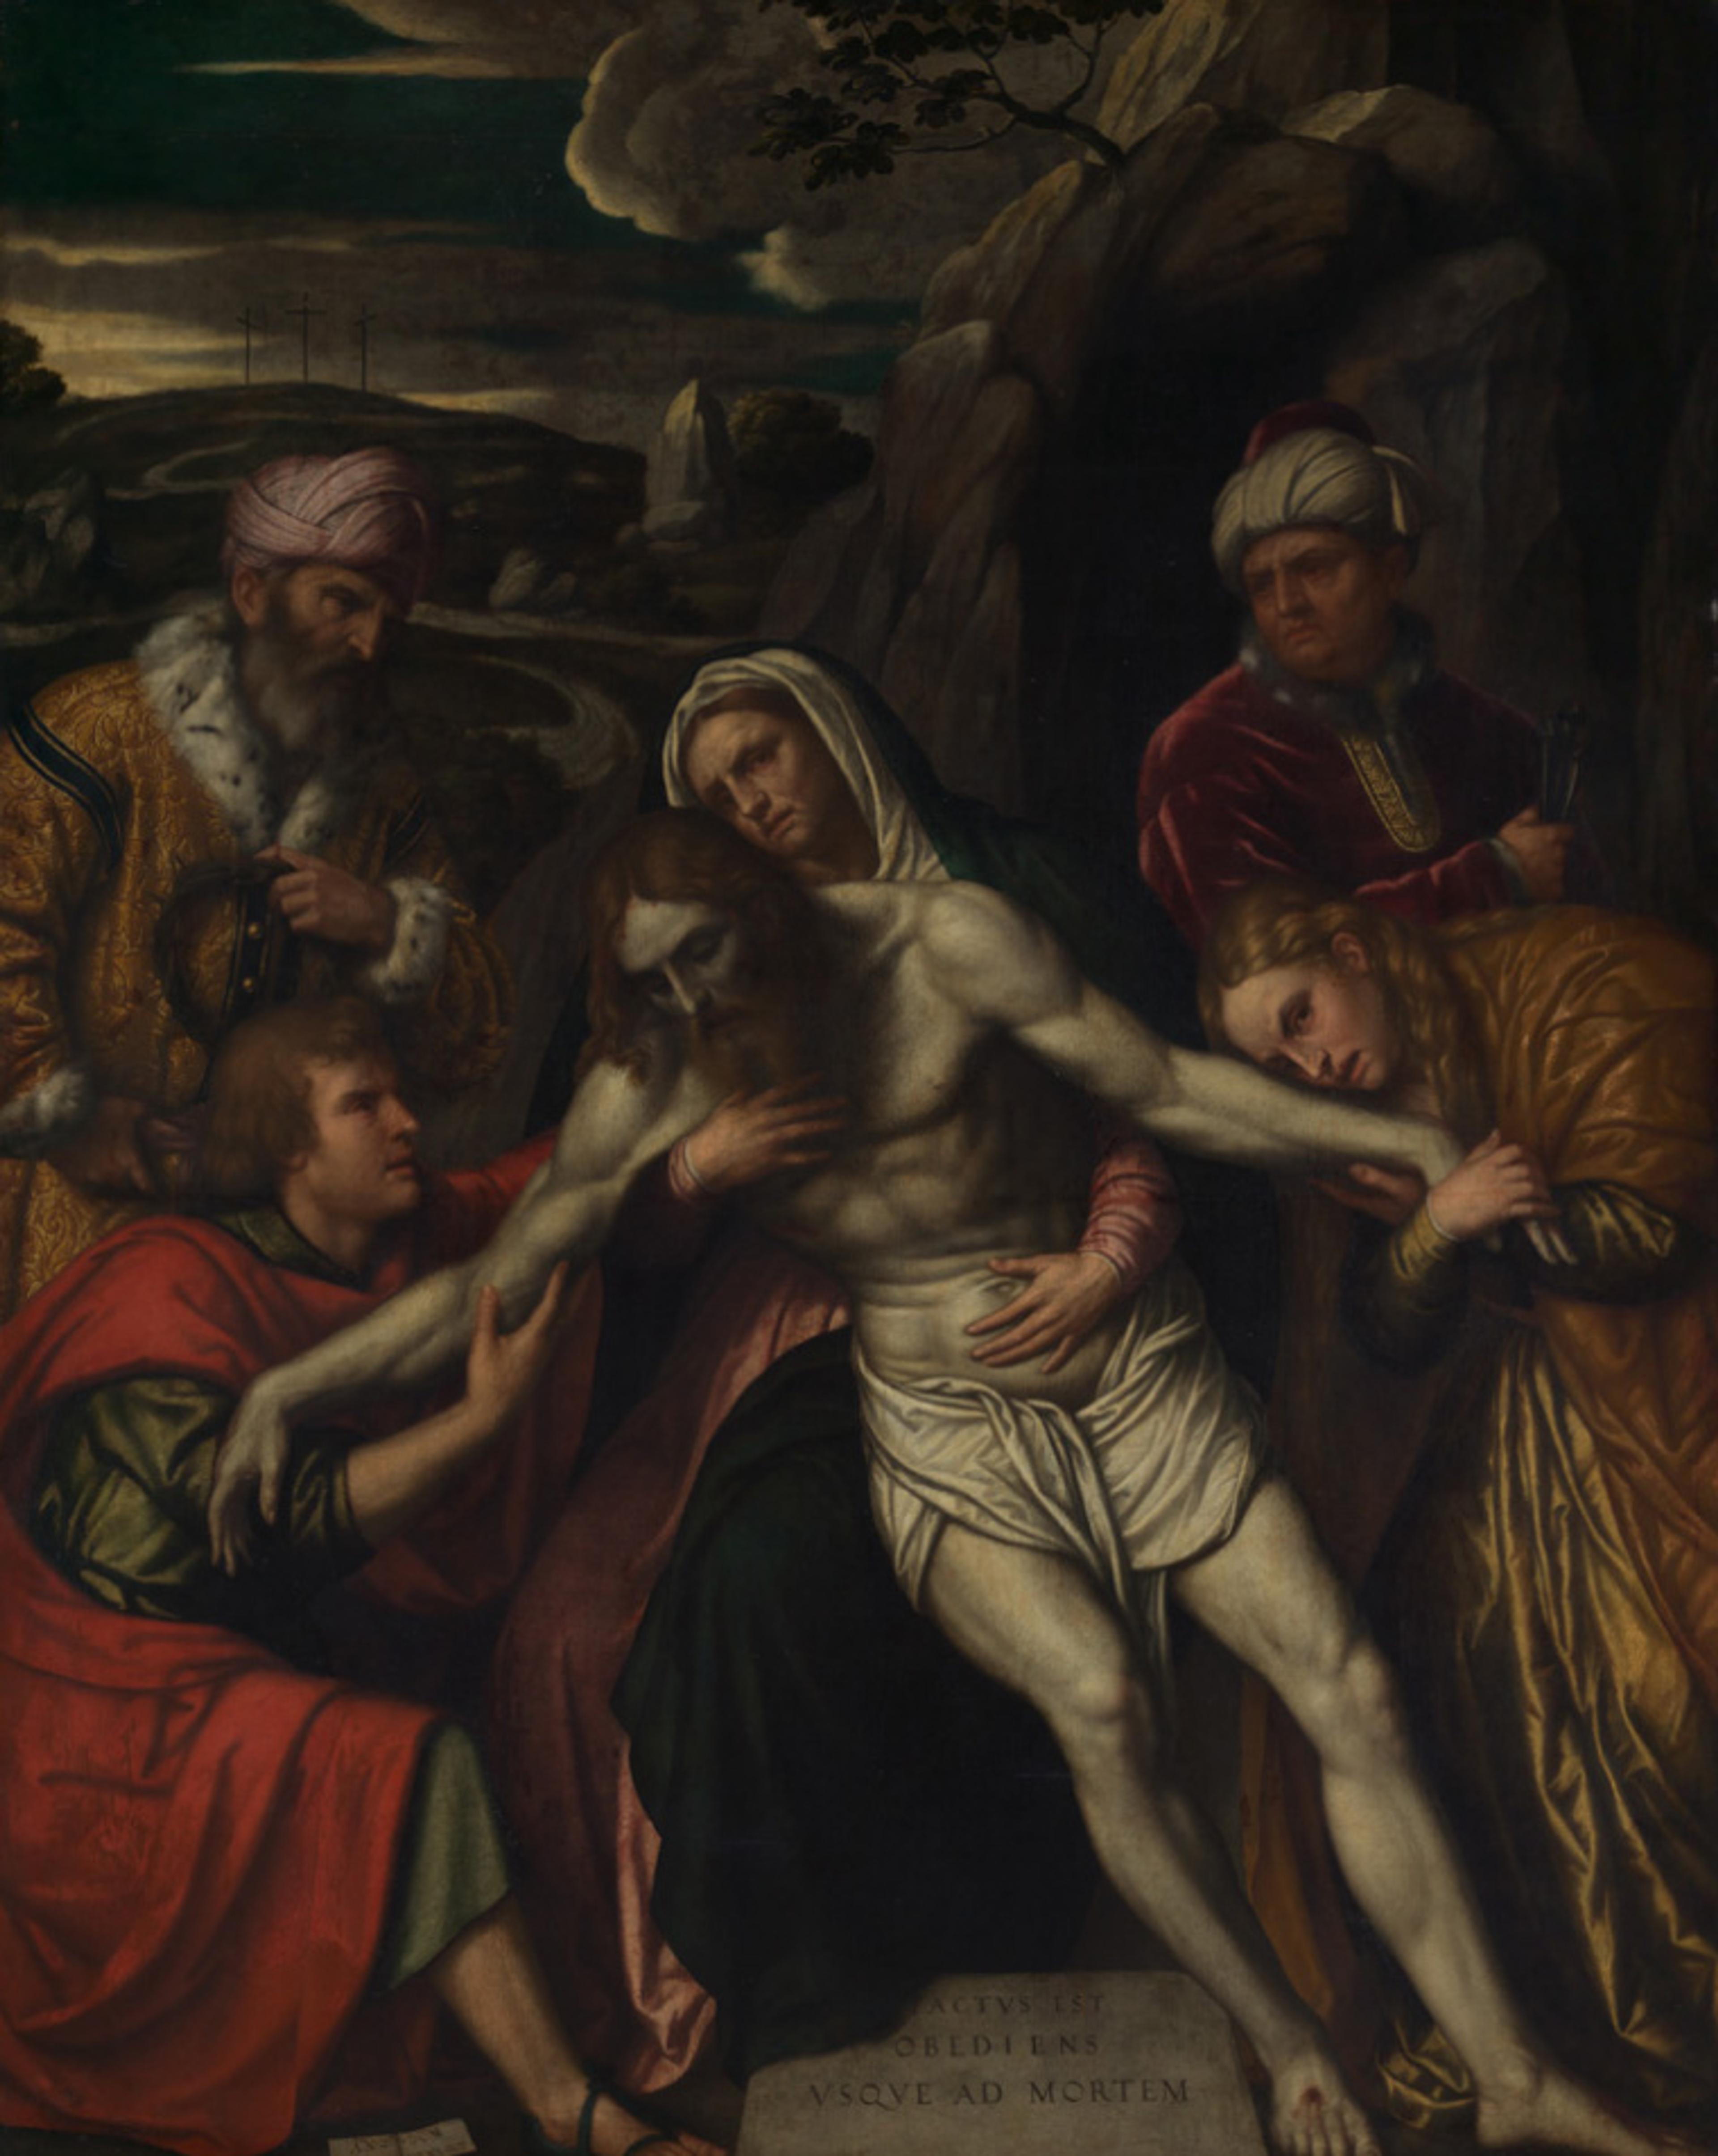 An entombment scene by the Italian painter Moretto da Brescia, showing Christ after the Crucifixion surrounded by the Virgin Mary, Mary Magdalen, and followers